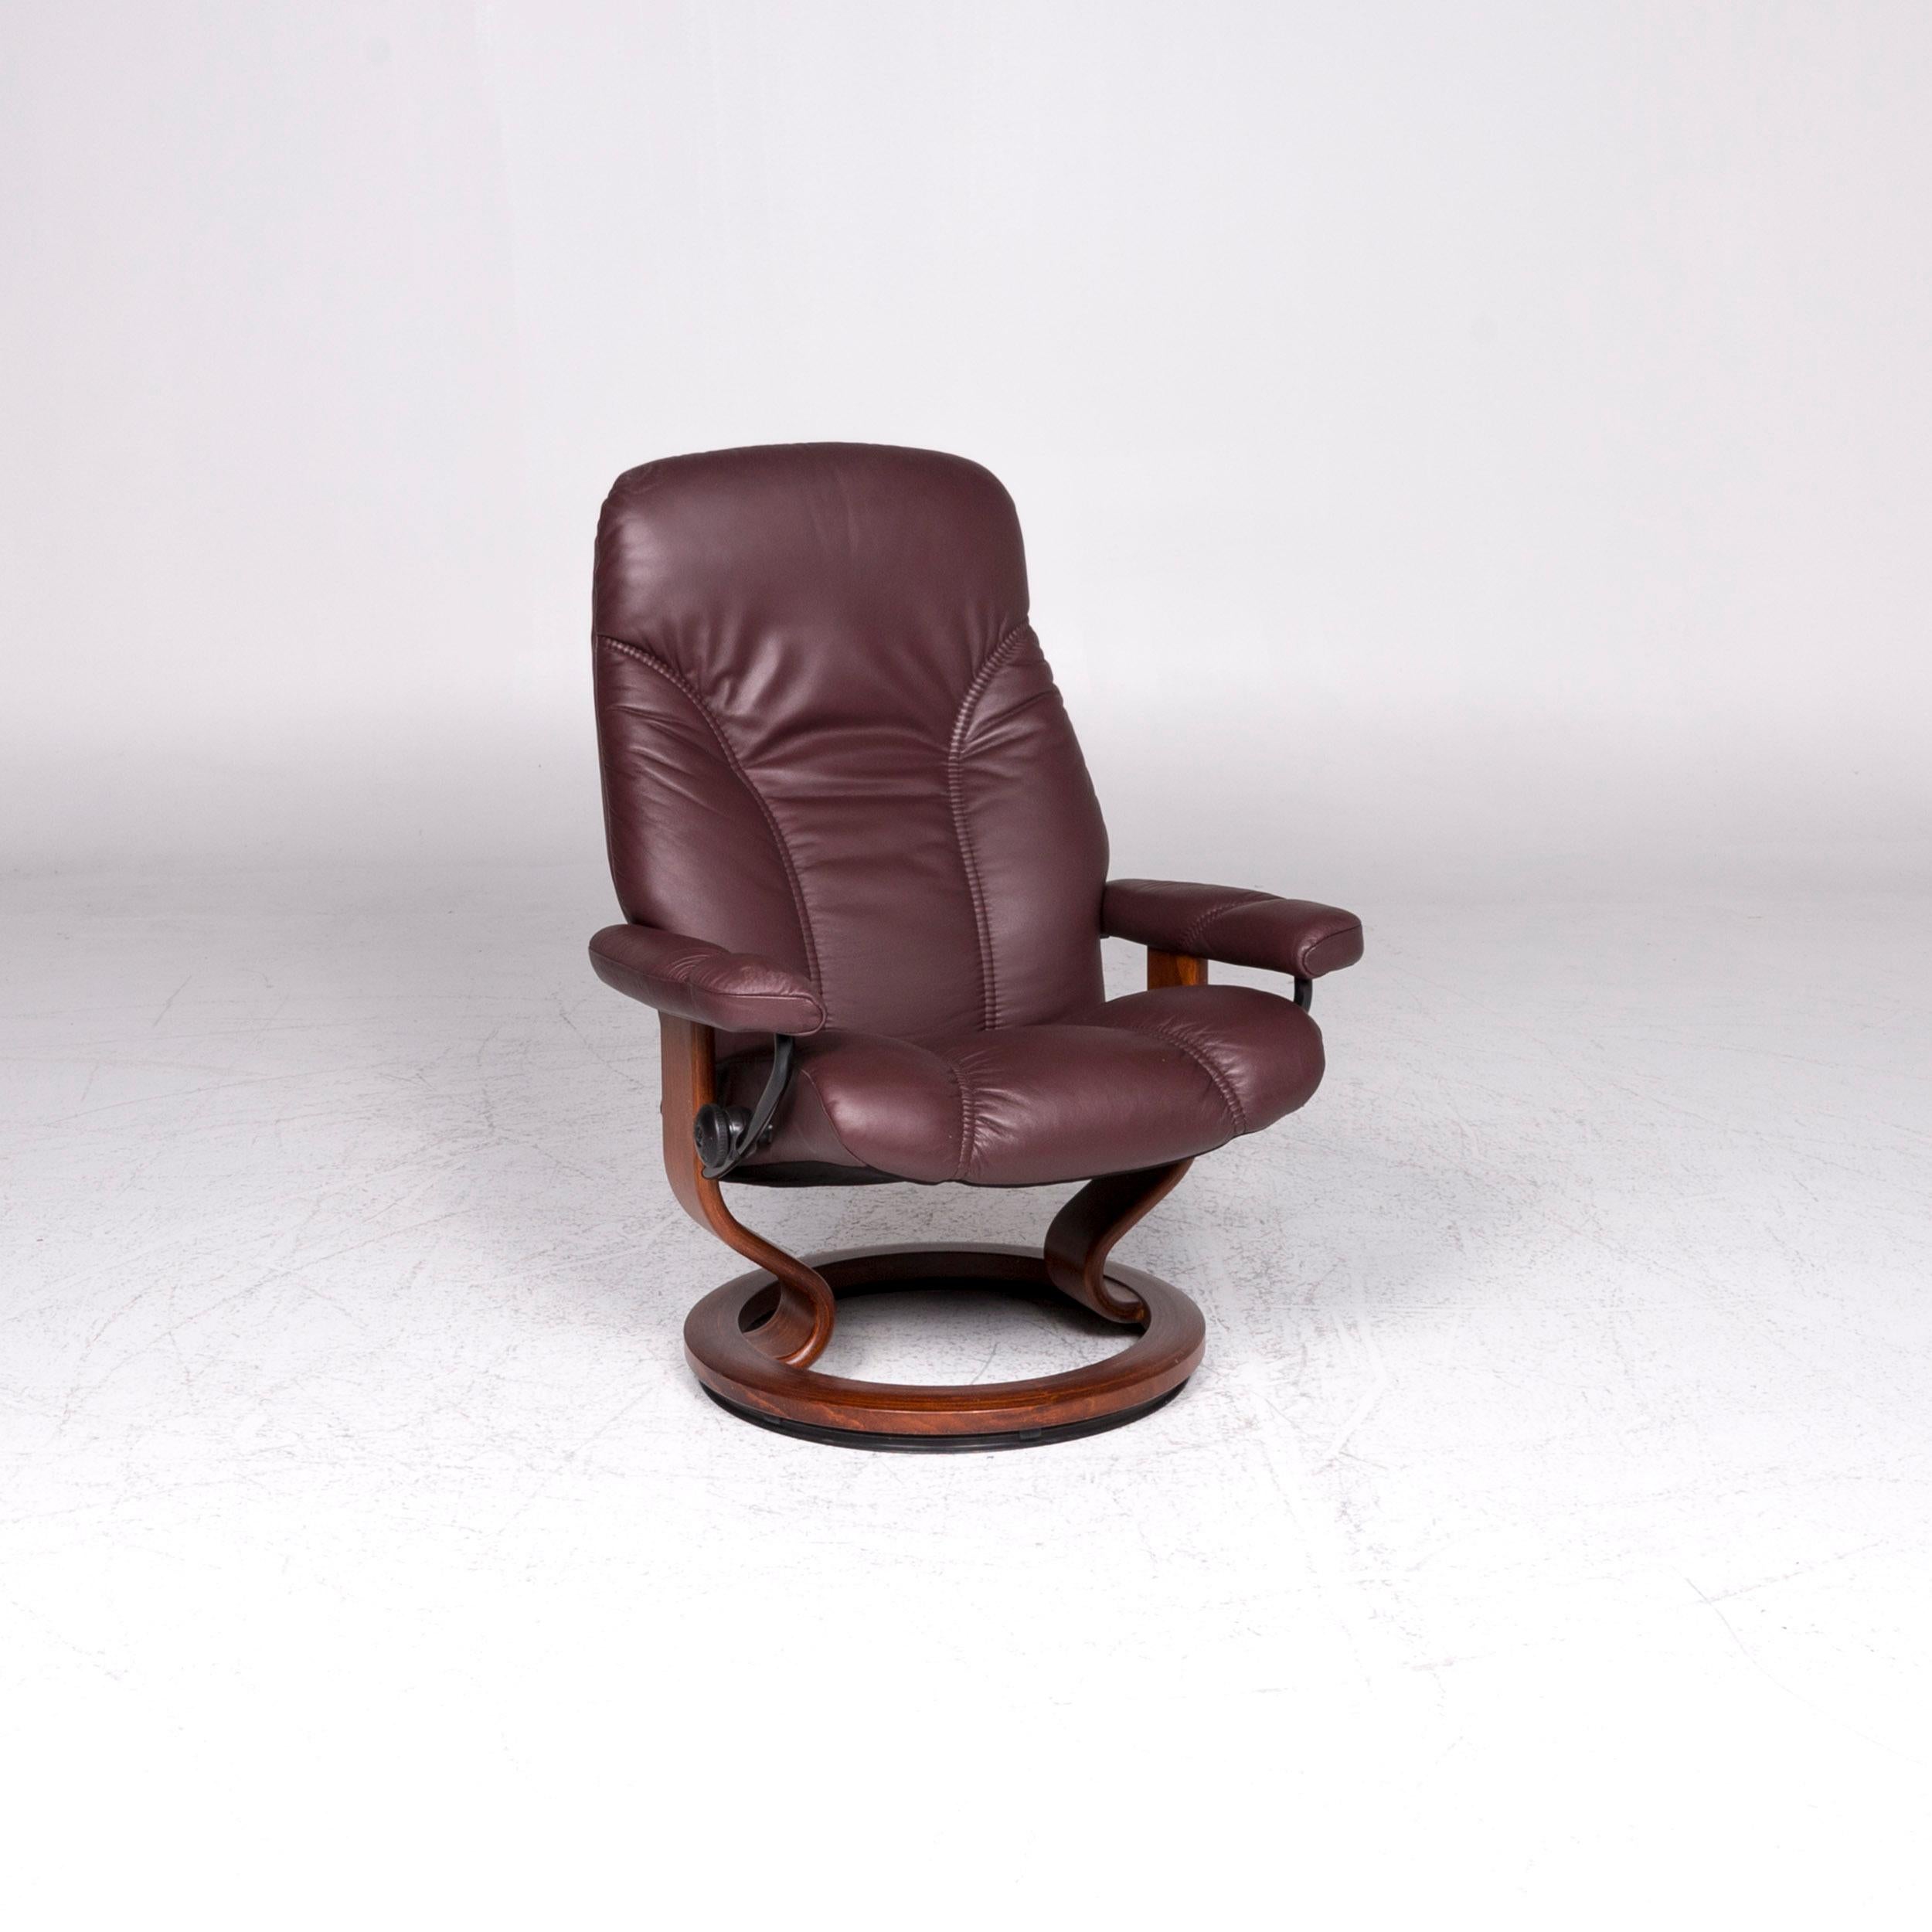 Stressless Consul Leather Armchair Stool Red-Brown Relax Function 2